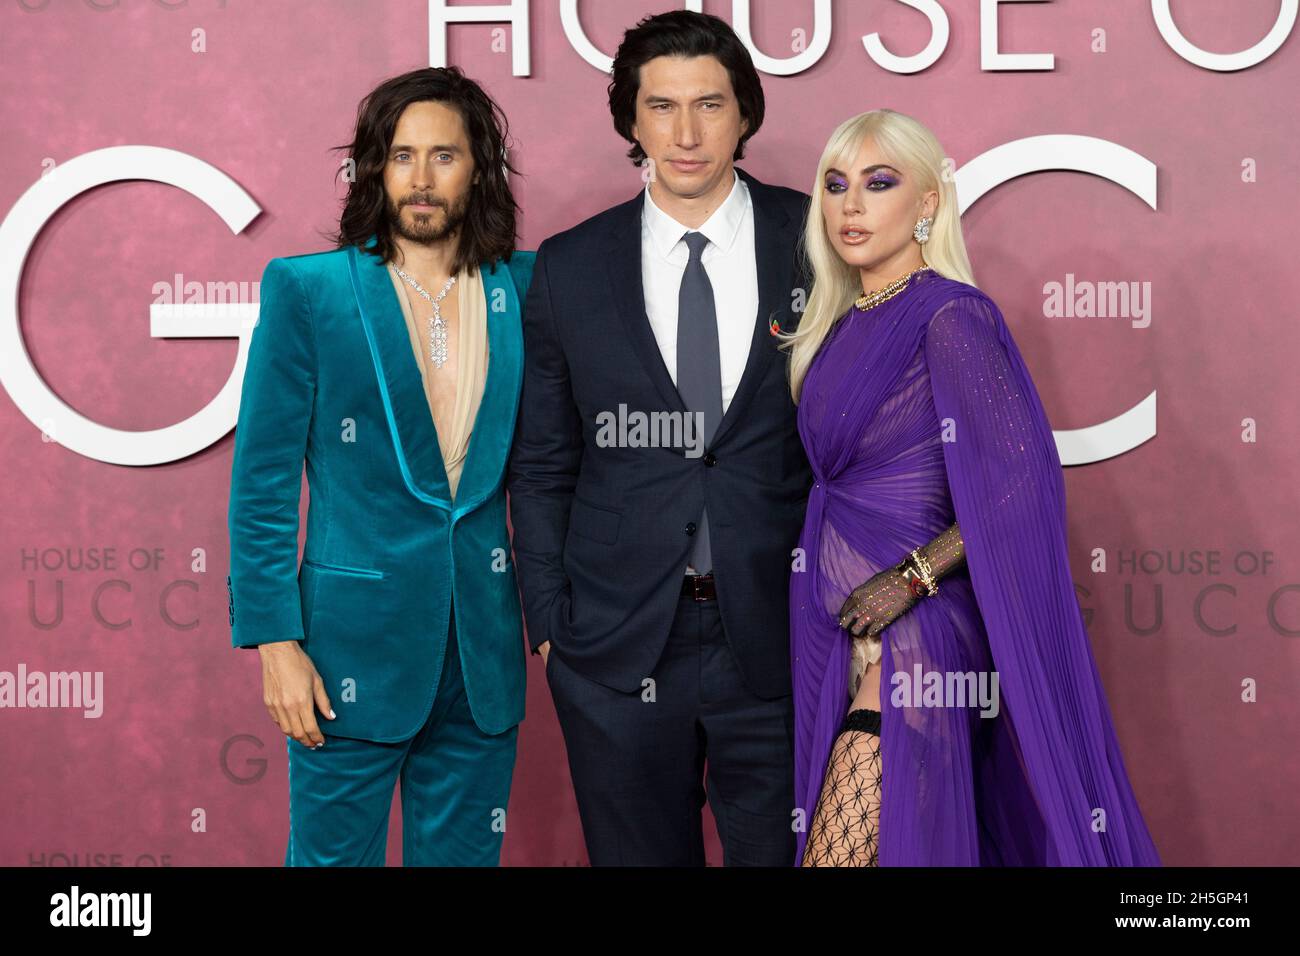 09/11/2021. London, UK.   Jared Leto, Adam Driver and Lady Gaga attend the House Of Gucci film premiere in House Of Gucci UK Film. Premiere - London, UK. 09 November 2021. Stock Photo